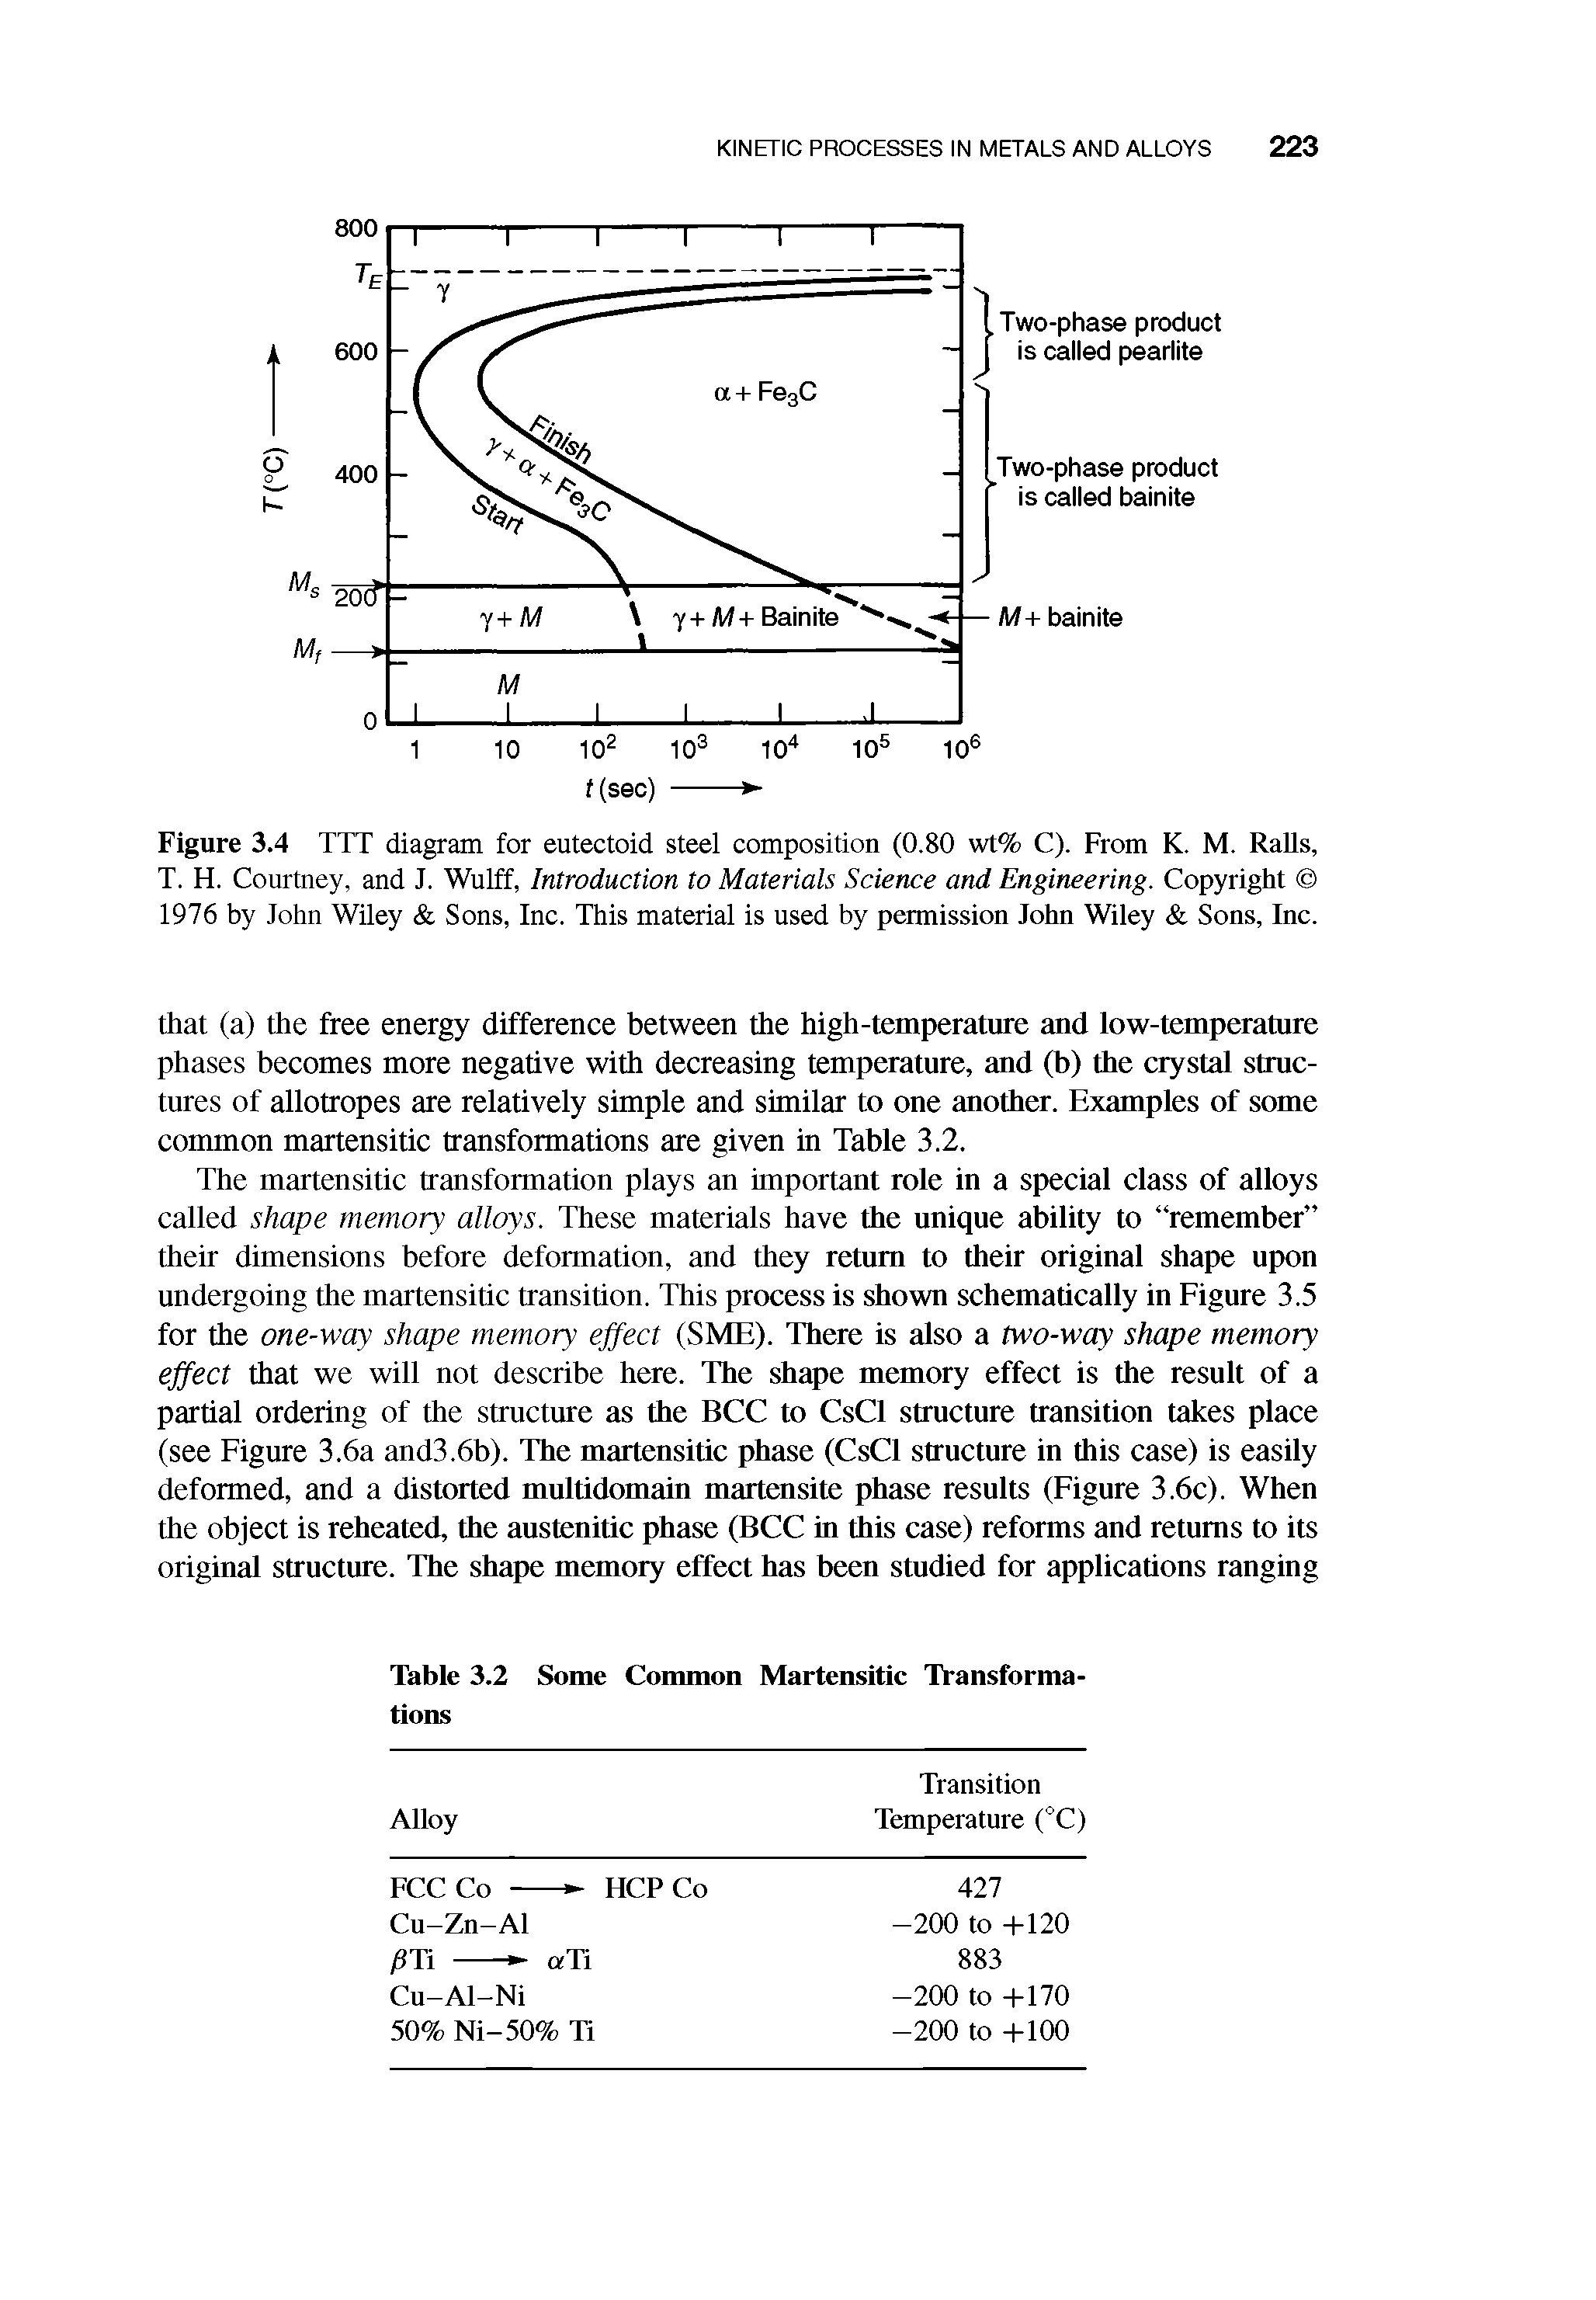 Figure 3.4 TXT diagram for eutectoid steel composition (0.80 wt% C). From K. M. Ralls, T. H. Courtney, and J. Wulff, Introduction to Materials Science and Engineering. Copyright 1976 by John Wiley Sons, Inc. This material is used by permission John Wiley Sons, Inc.